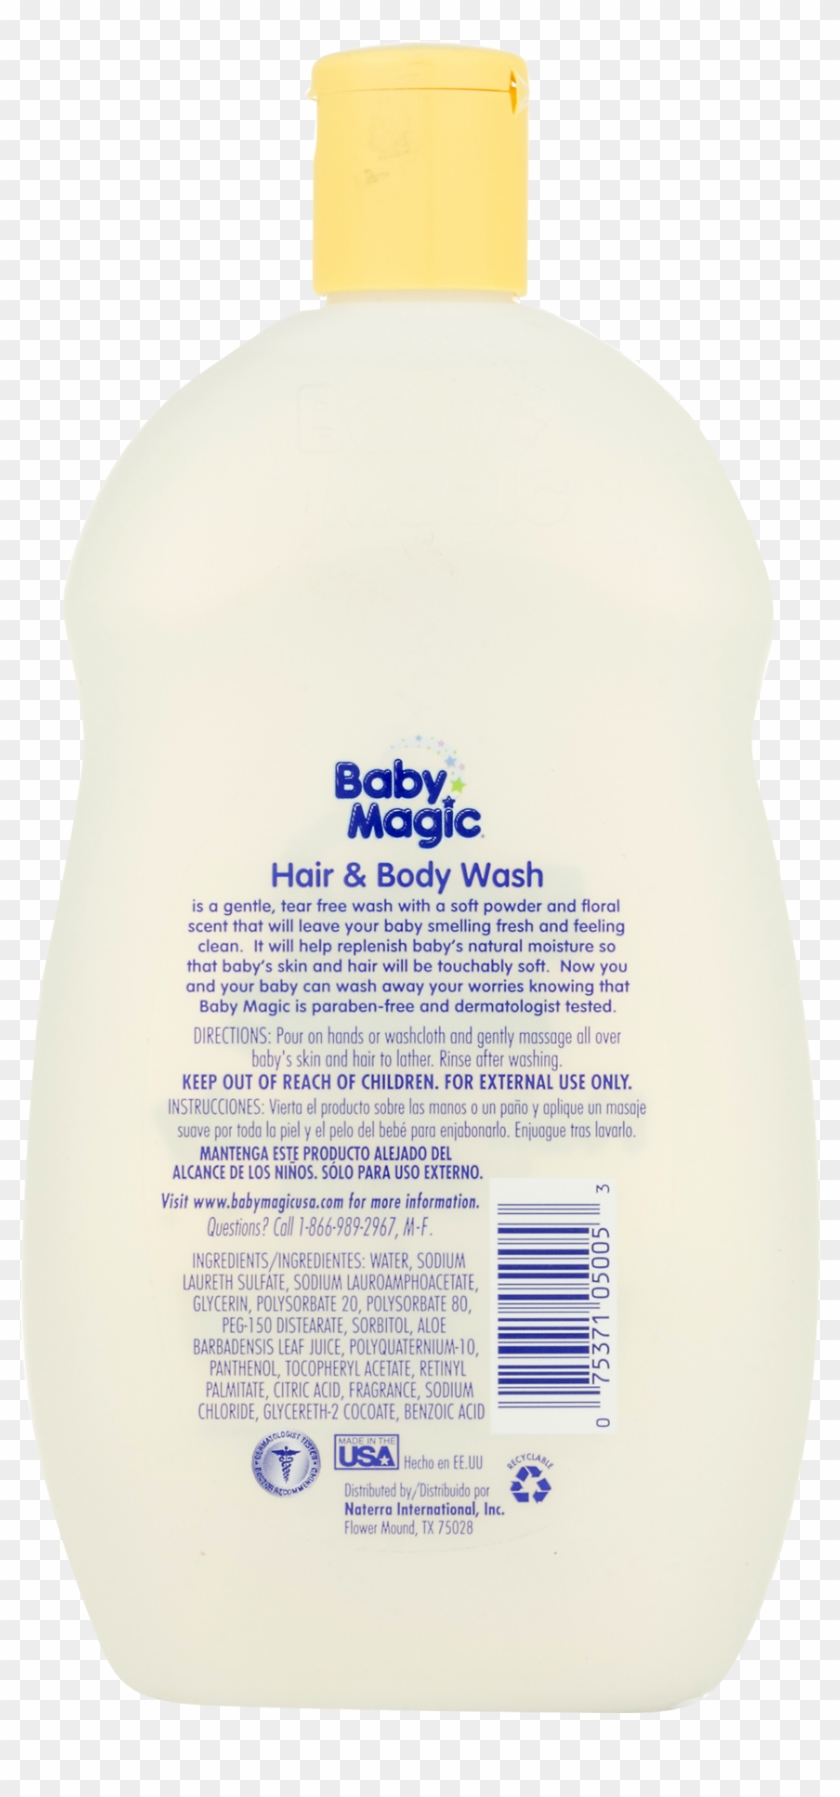 Baby Magic Hair And Body Wash, Soft Powder Scent, - Baby Magic Clipart #3522173